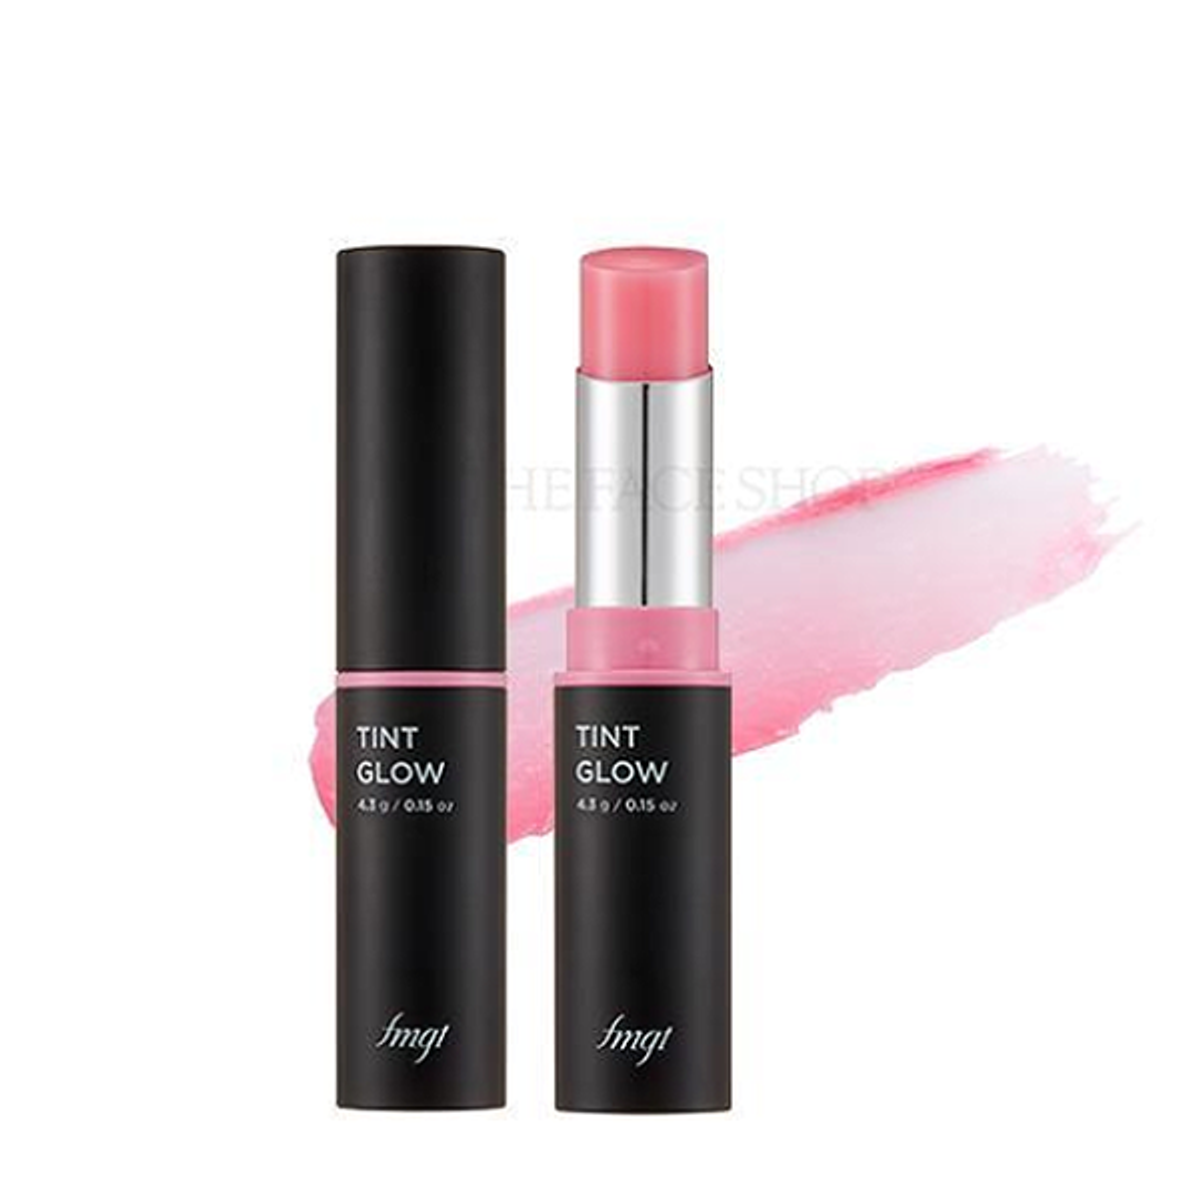 gift-fmgt-son-moi-duong-am-tu-nhien-thefaceshop-tint-glow-01-pink-story-4-3g-1